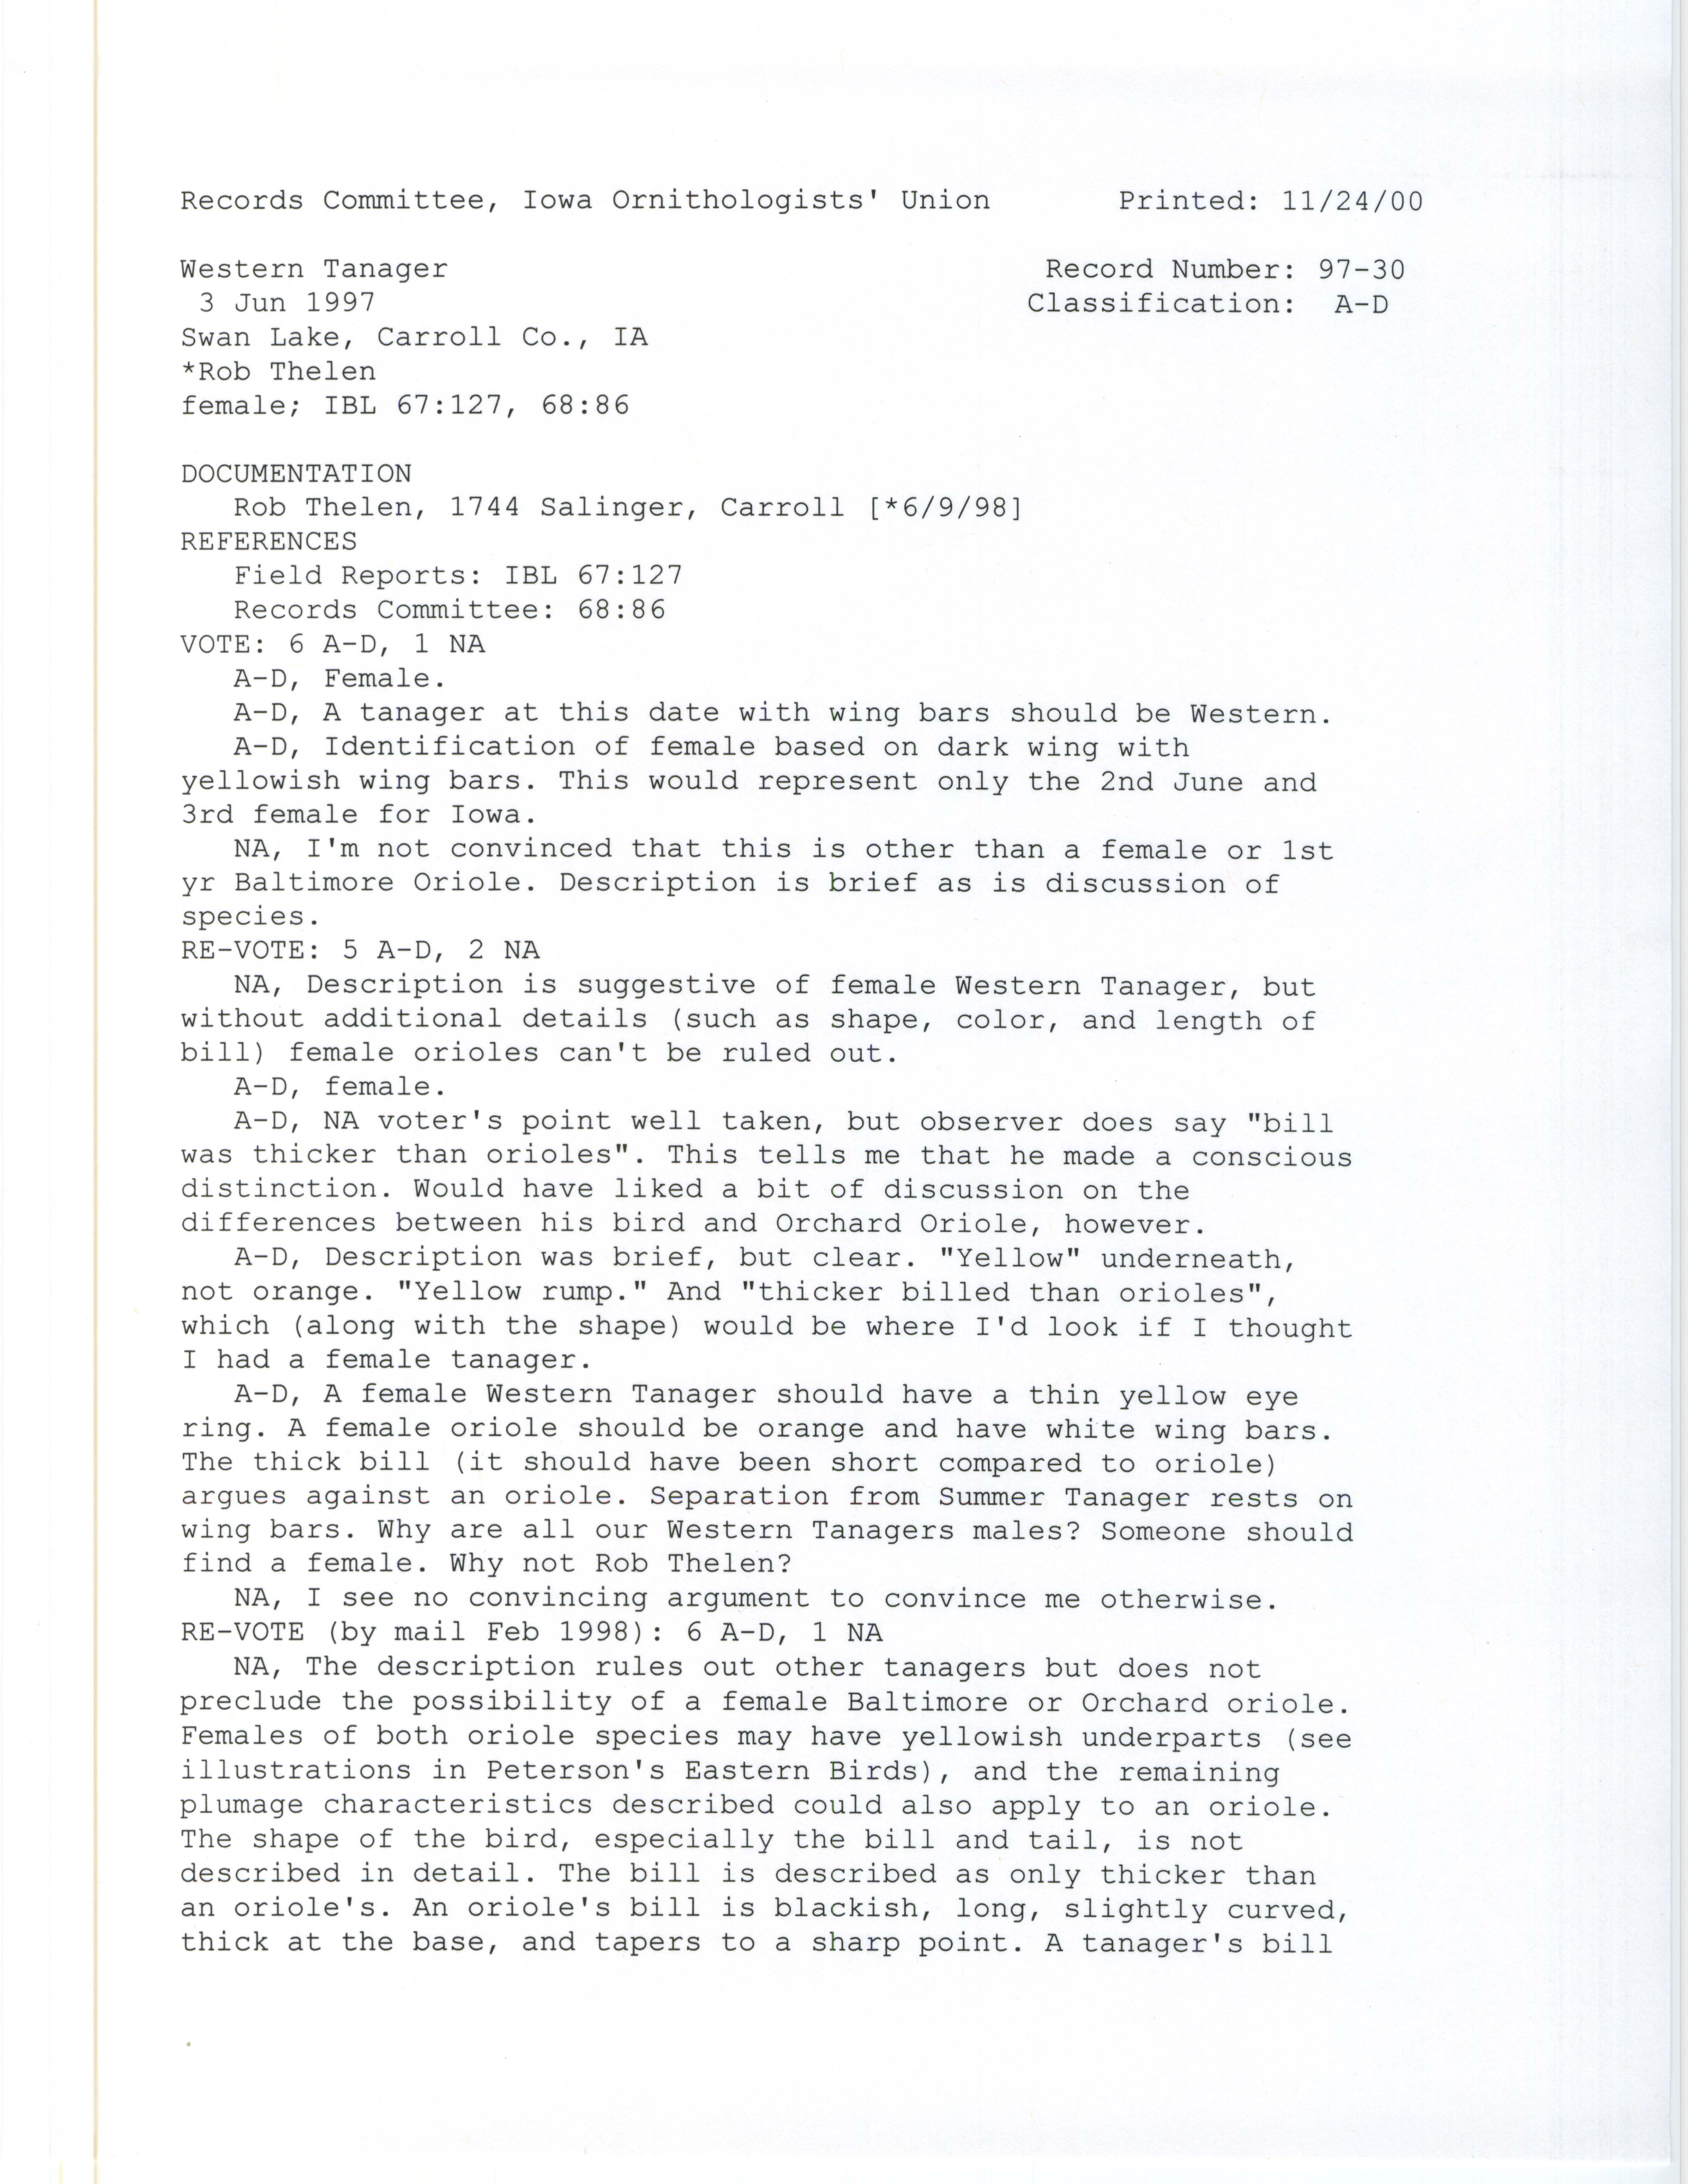 Records Committee review for rare bird sighting for Western Tanager at Swan Lake, 1997